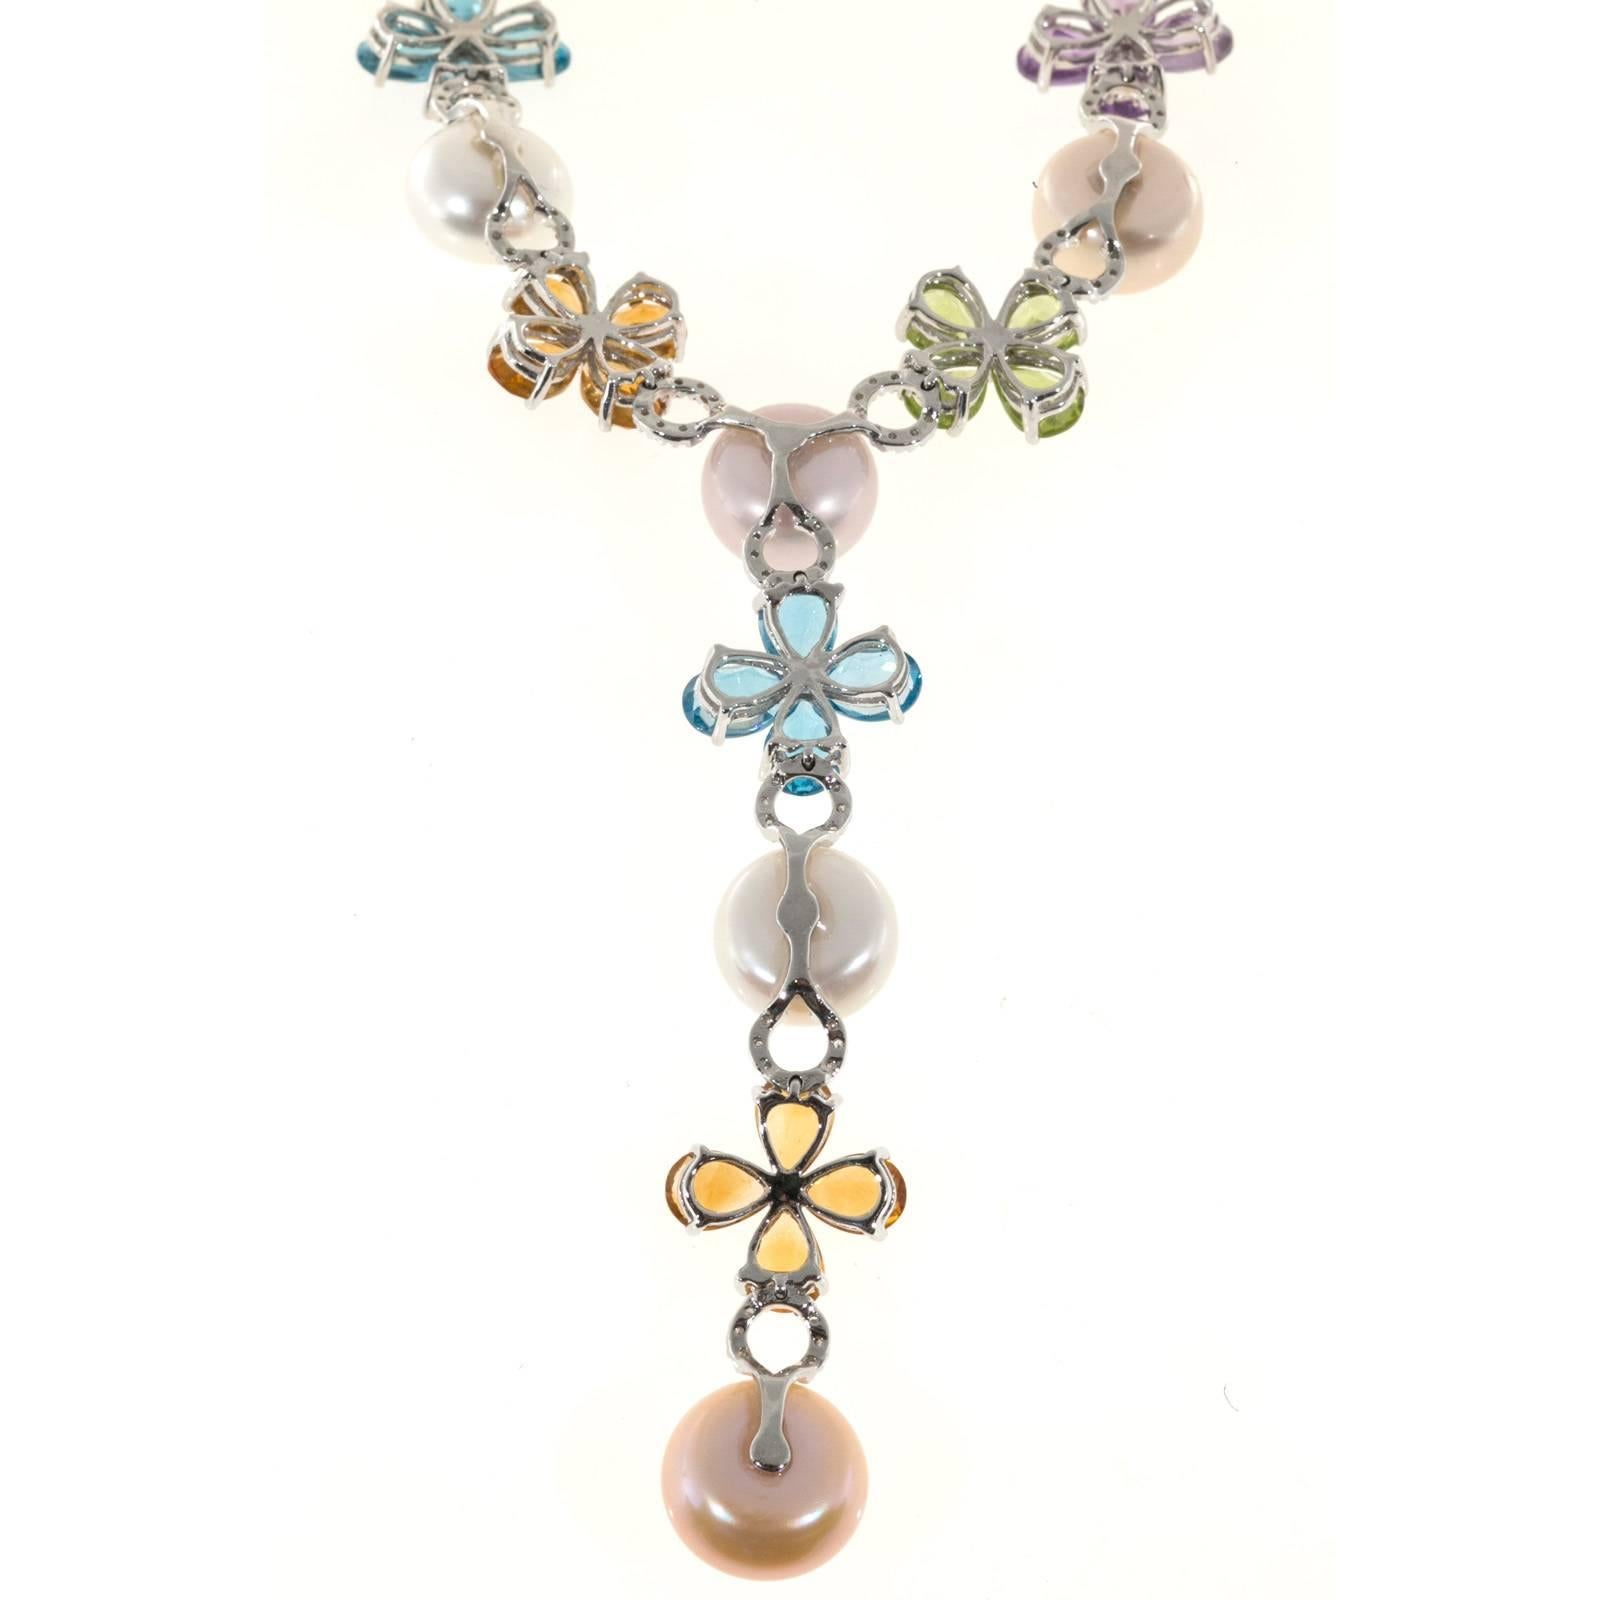 Necklace with brightly colored pear shaped genuine stones and multi-color pearls in 14k white gold.

16 multi-color button pearls 11.5mm
12 pear shaped Peridot 7 x 5mm, approx. total weight 8.40cts
12 pear shaped Citrine, 7 x 5mm, approx. total